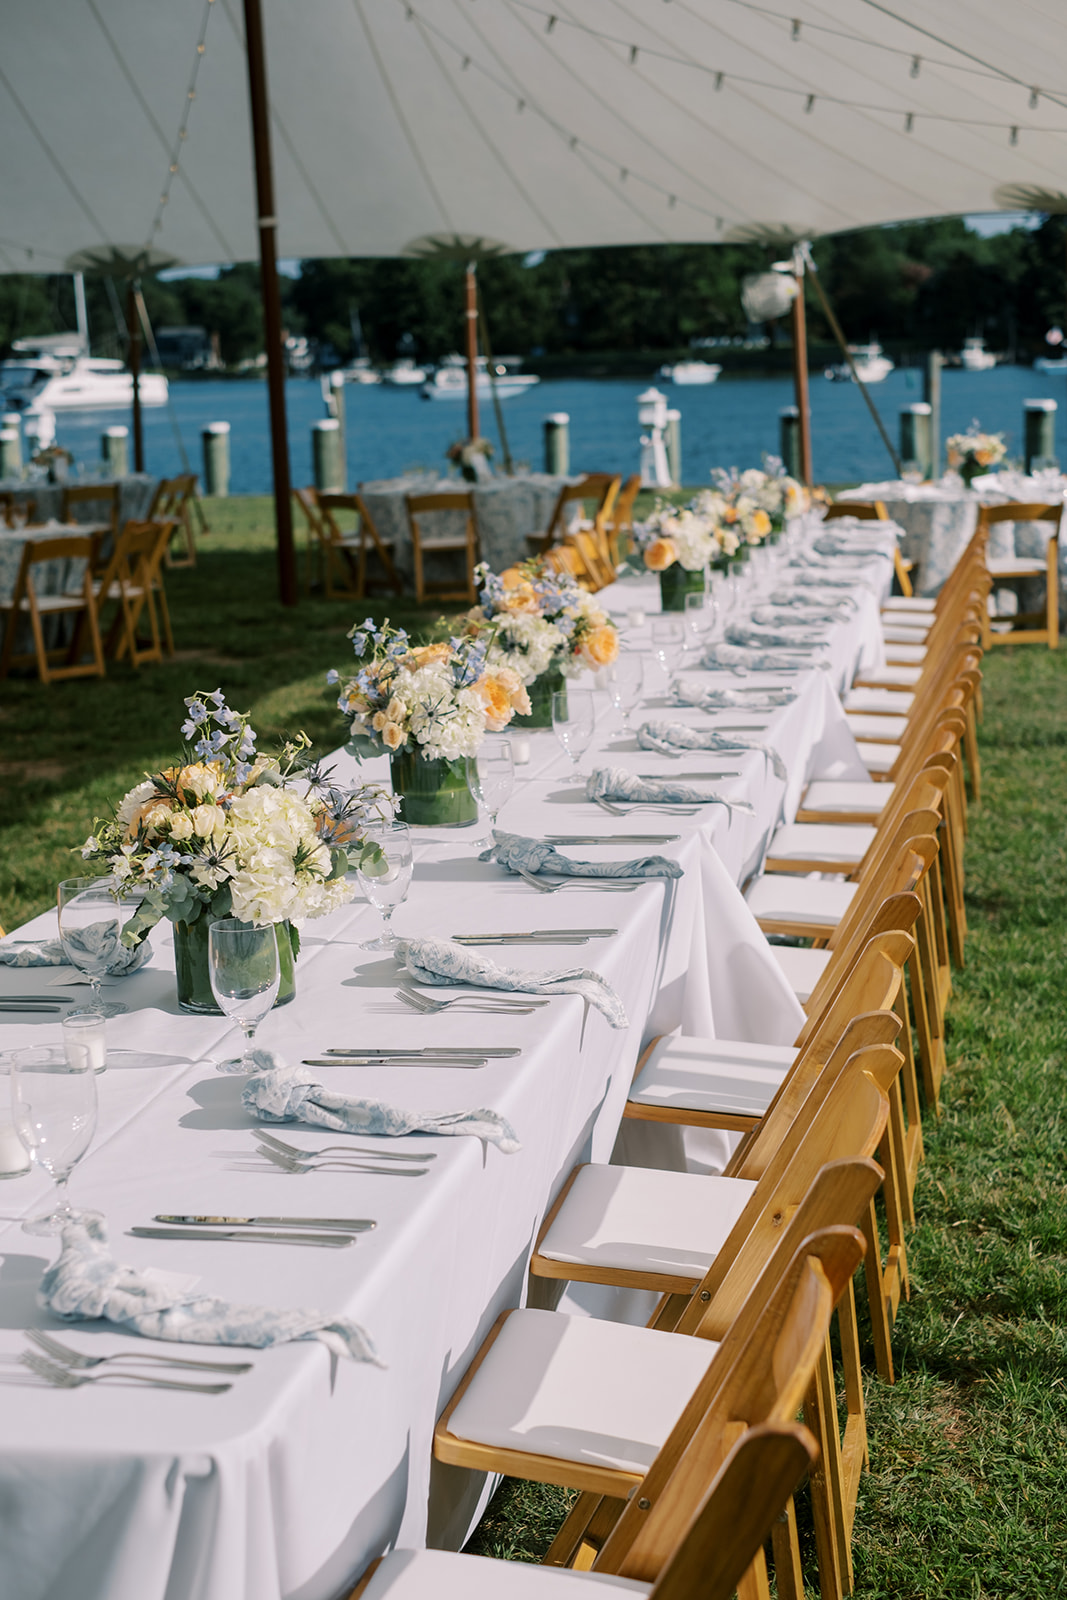 Chesapeake bay maritime museum head table details under the tent 